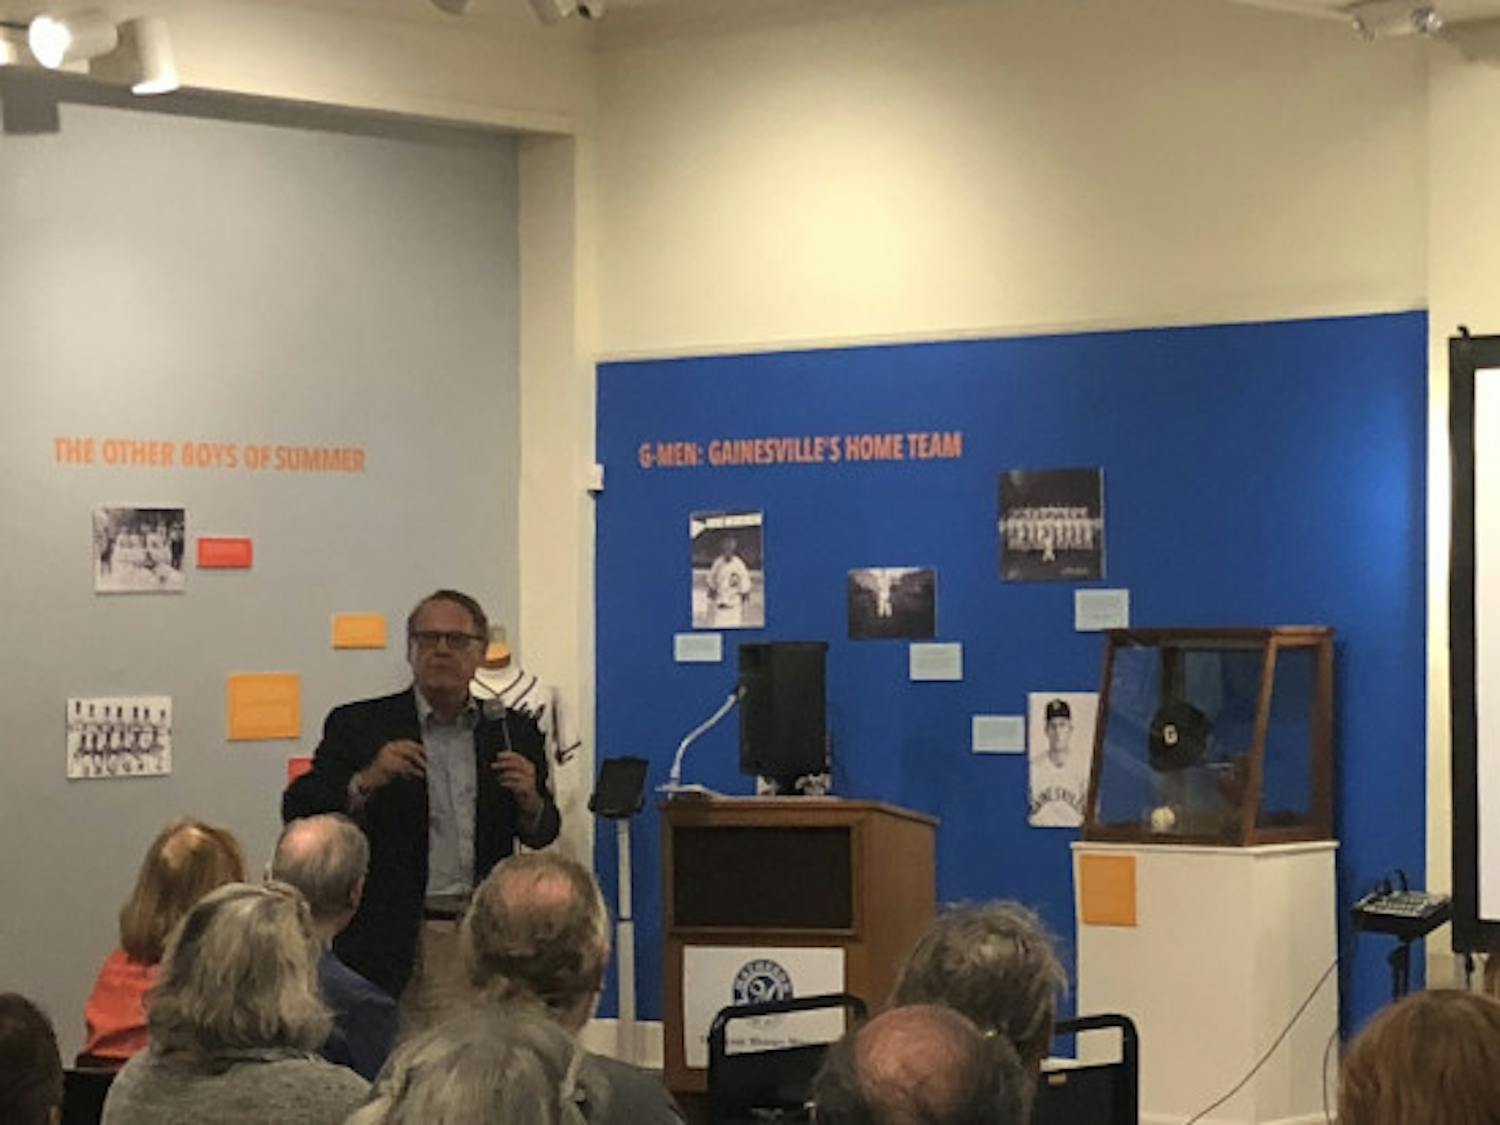 Gary Mormino, a professor from the University of South Florida, visited the Matheson History Museum of Art on Jan. 12 and explored Florida food history in his lecture, “10 Foods that Define Florida."